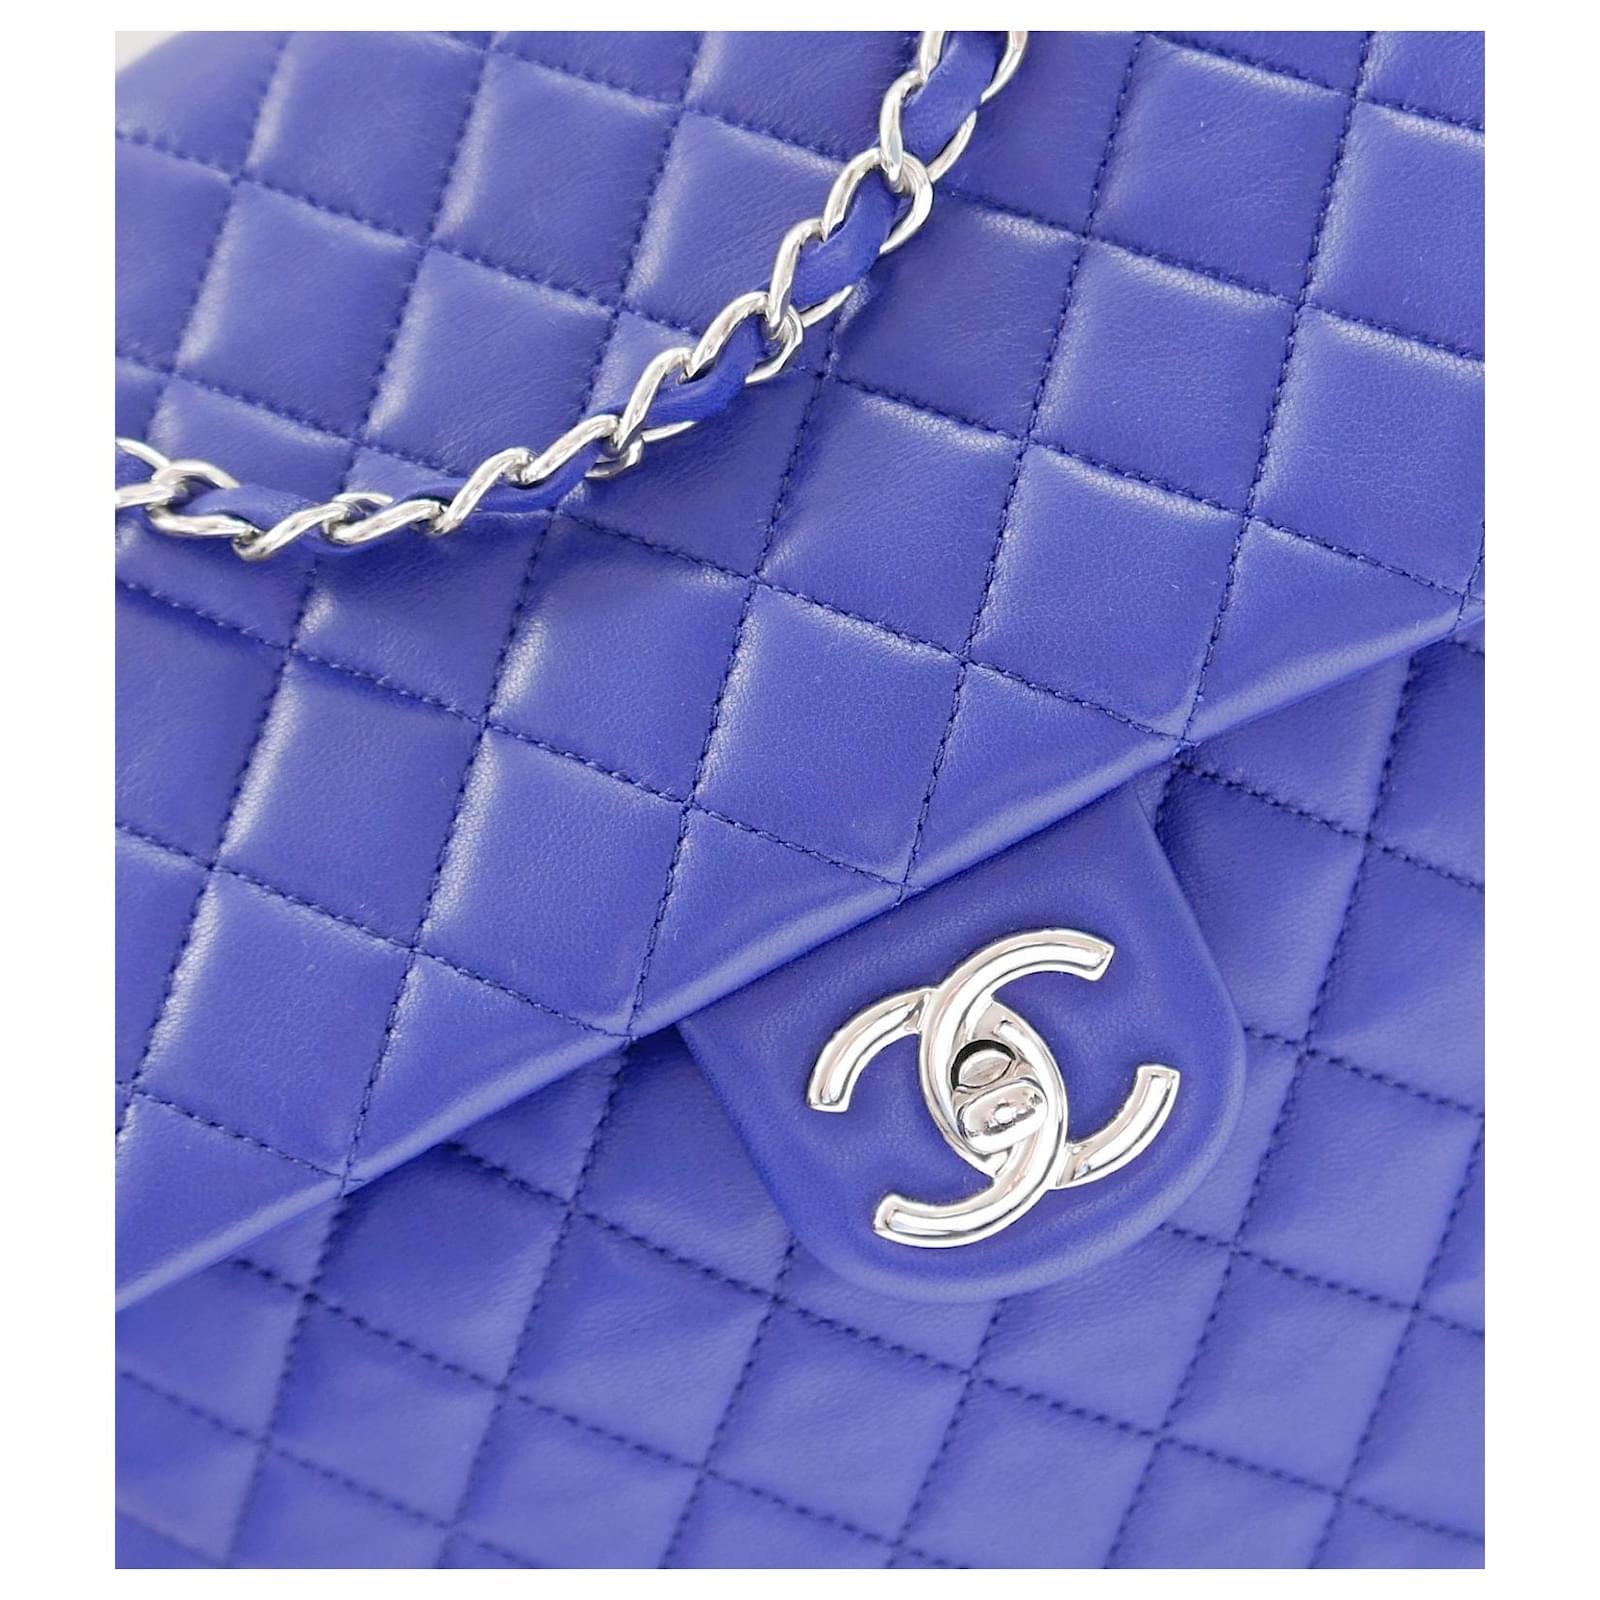 Super cool Chanel Urban Spirit backpack - worn once and comes with authenticity card and dustbag. Made from bright blue lamb leather with signature diamond quilting, it has silvertone CC turn lock flap and chain link top handle and two leather